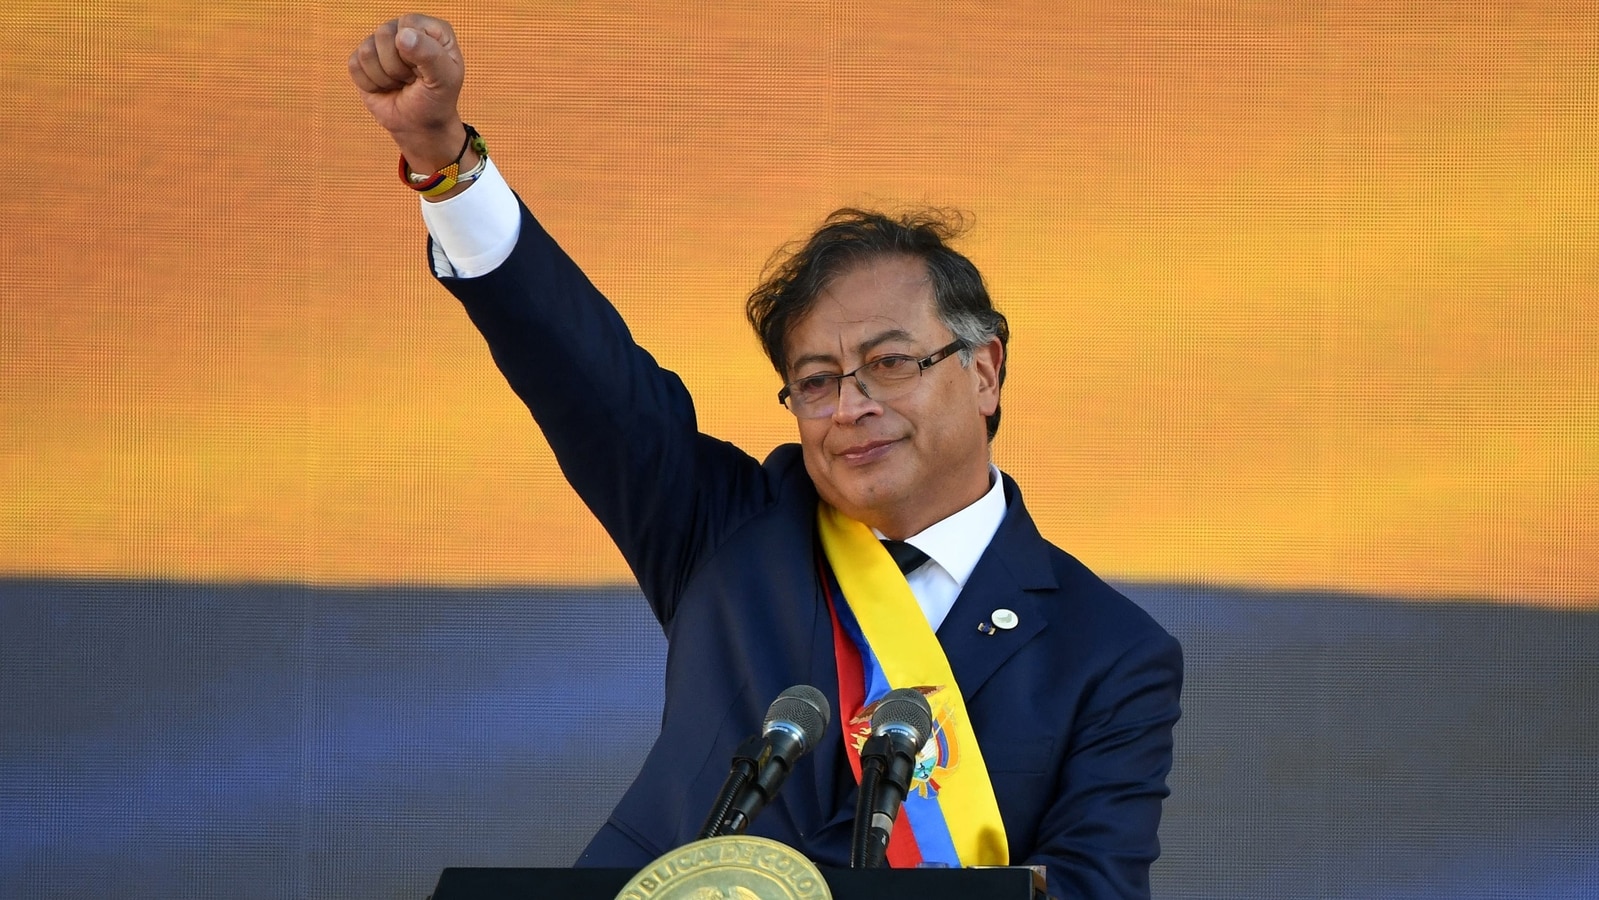 Gustavo Petro sworn in as Colombia's first leftist president | World News - Hindustan Times